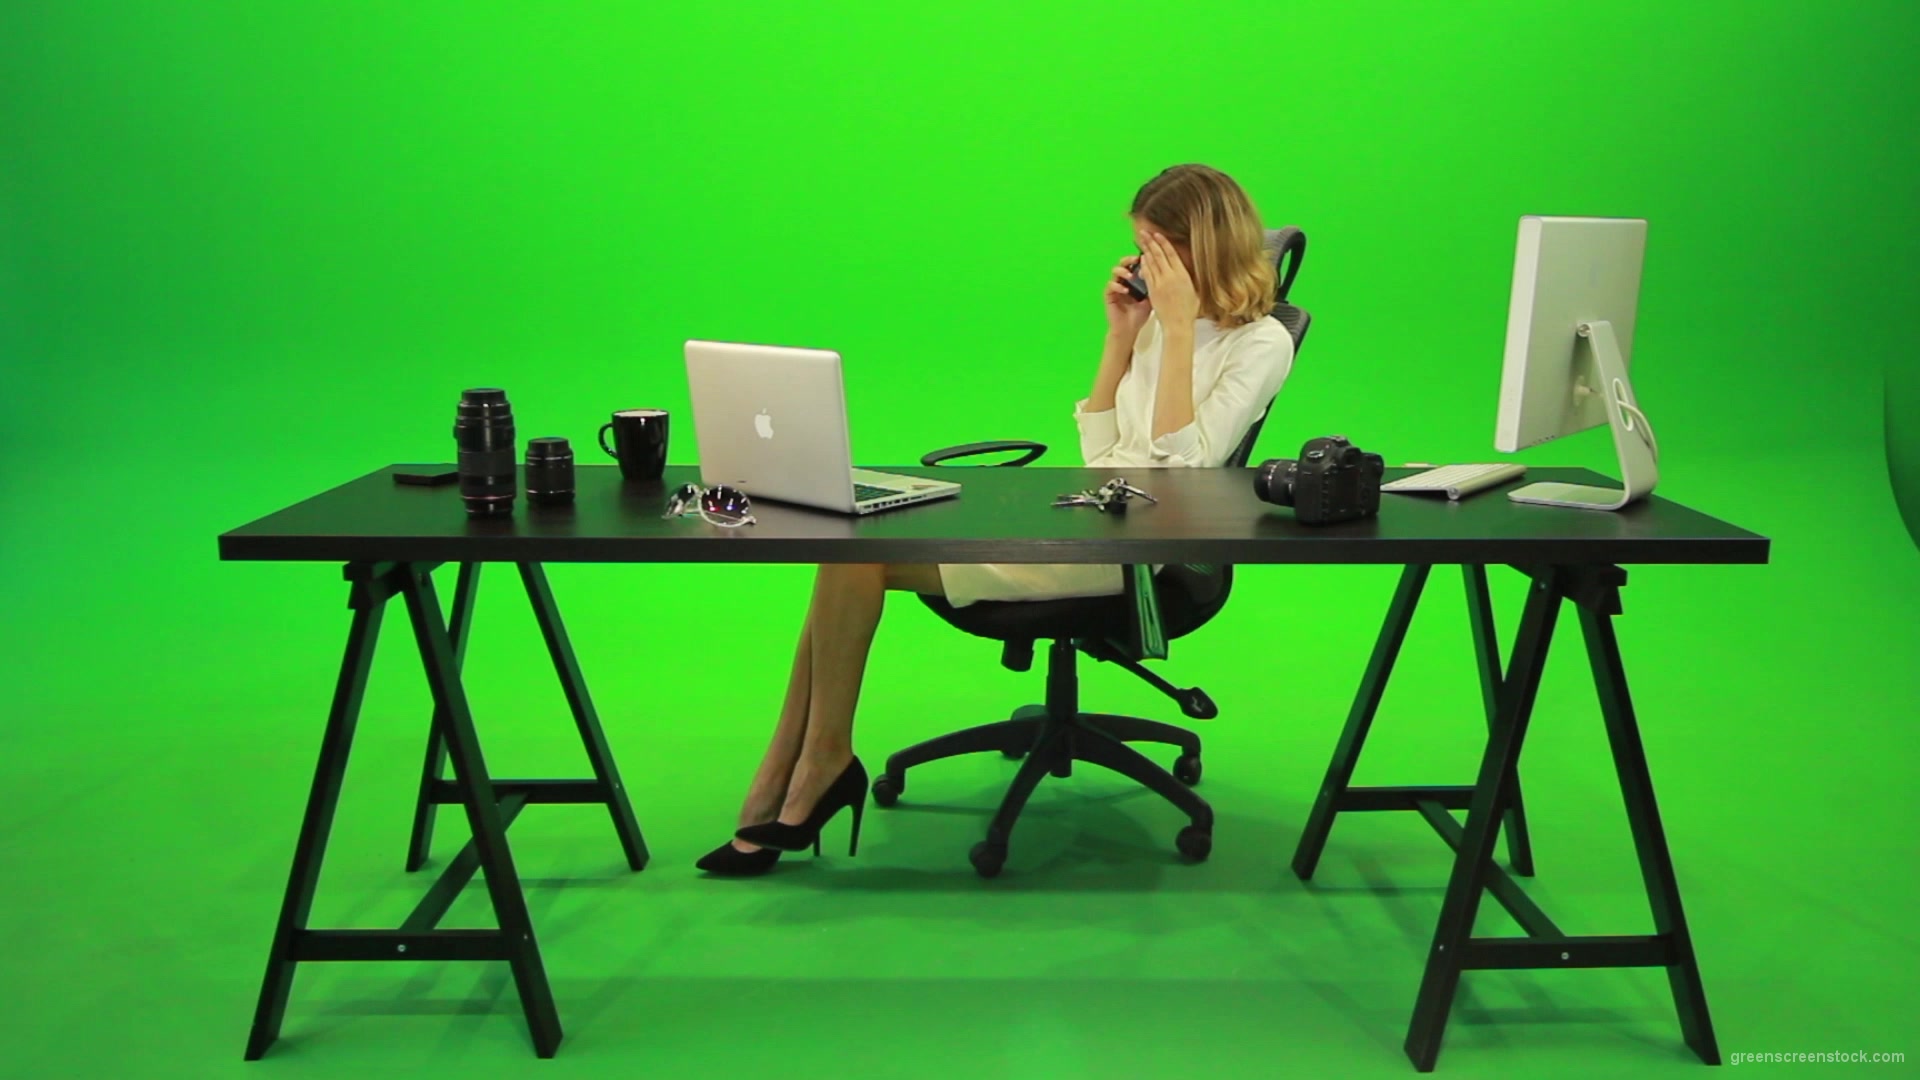 Angry-Business-Woman-Talking-on-the-Phone-Green-Screen-Footage_005 Green Screen Stock